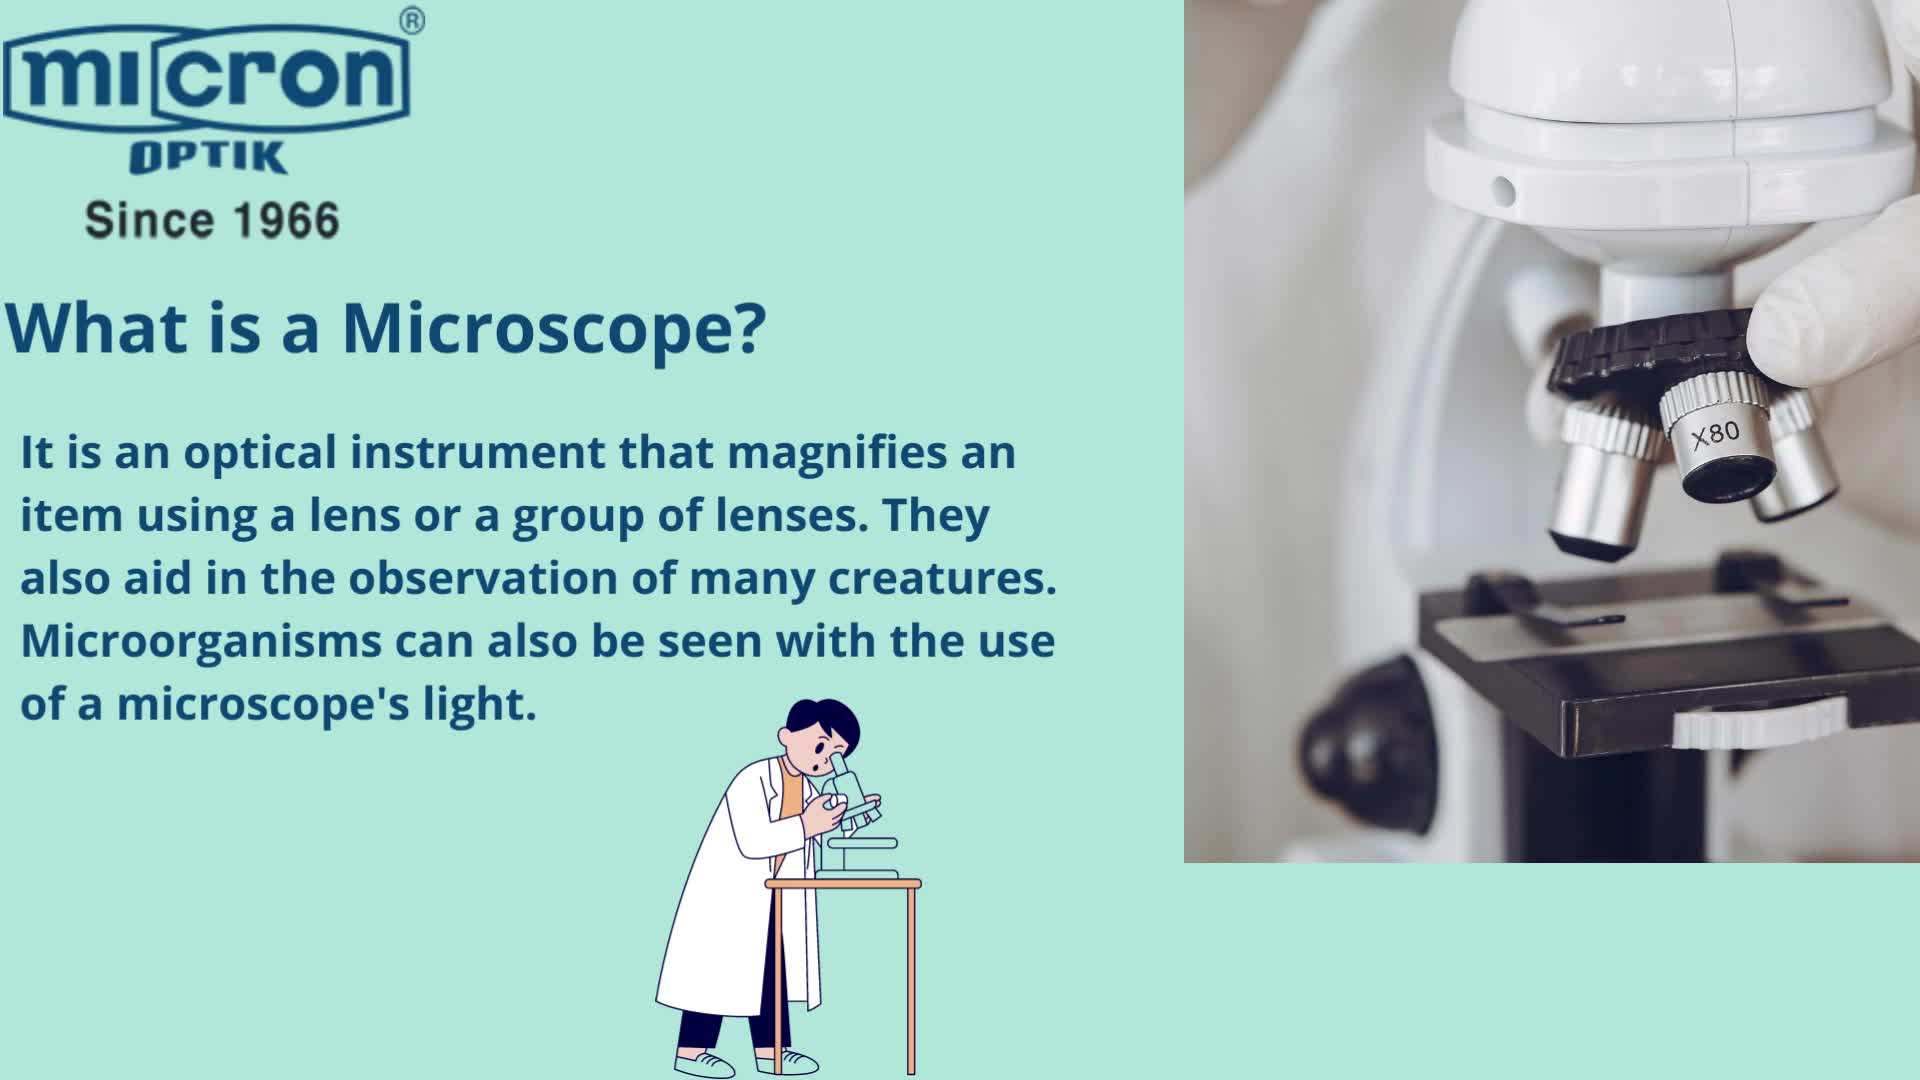 What is a Microscope?